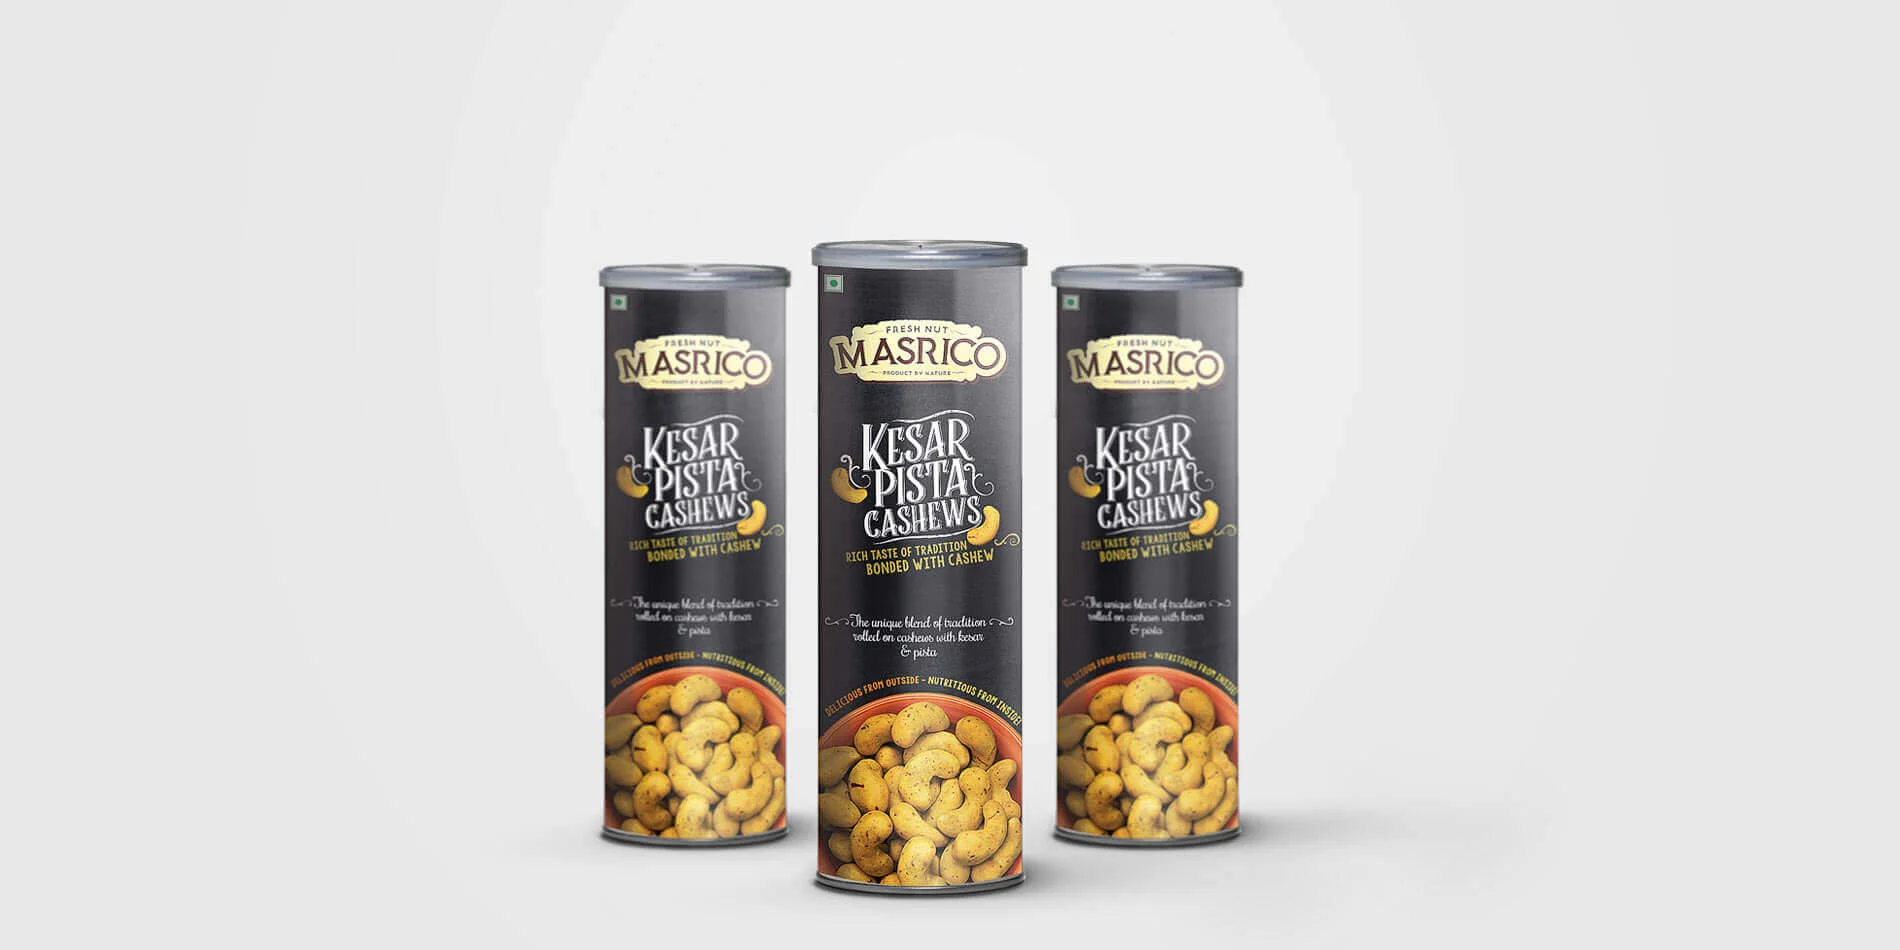 masrico, best flavored cashew nut brand in india,  flavoured dryfruit manufacturers, cashews, almonds, pistachios, best dry fruits, flavoured dry fruits, roasted cashew nuts, mumbai, flavor, delicious, snack, chocolate cashews, nut lovers,  kesar pista cashews,  roasted almonds, salted pistachios,  dark chocolate cashews, chocolate rolled cashews, best chocolate cashews & almonds, salted cashew nut, brij design studio